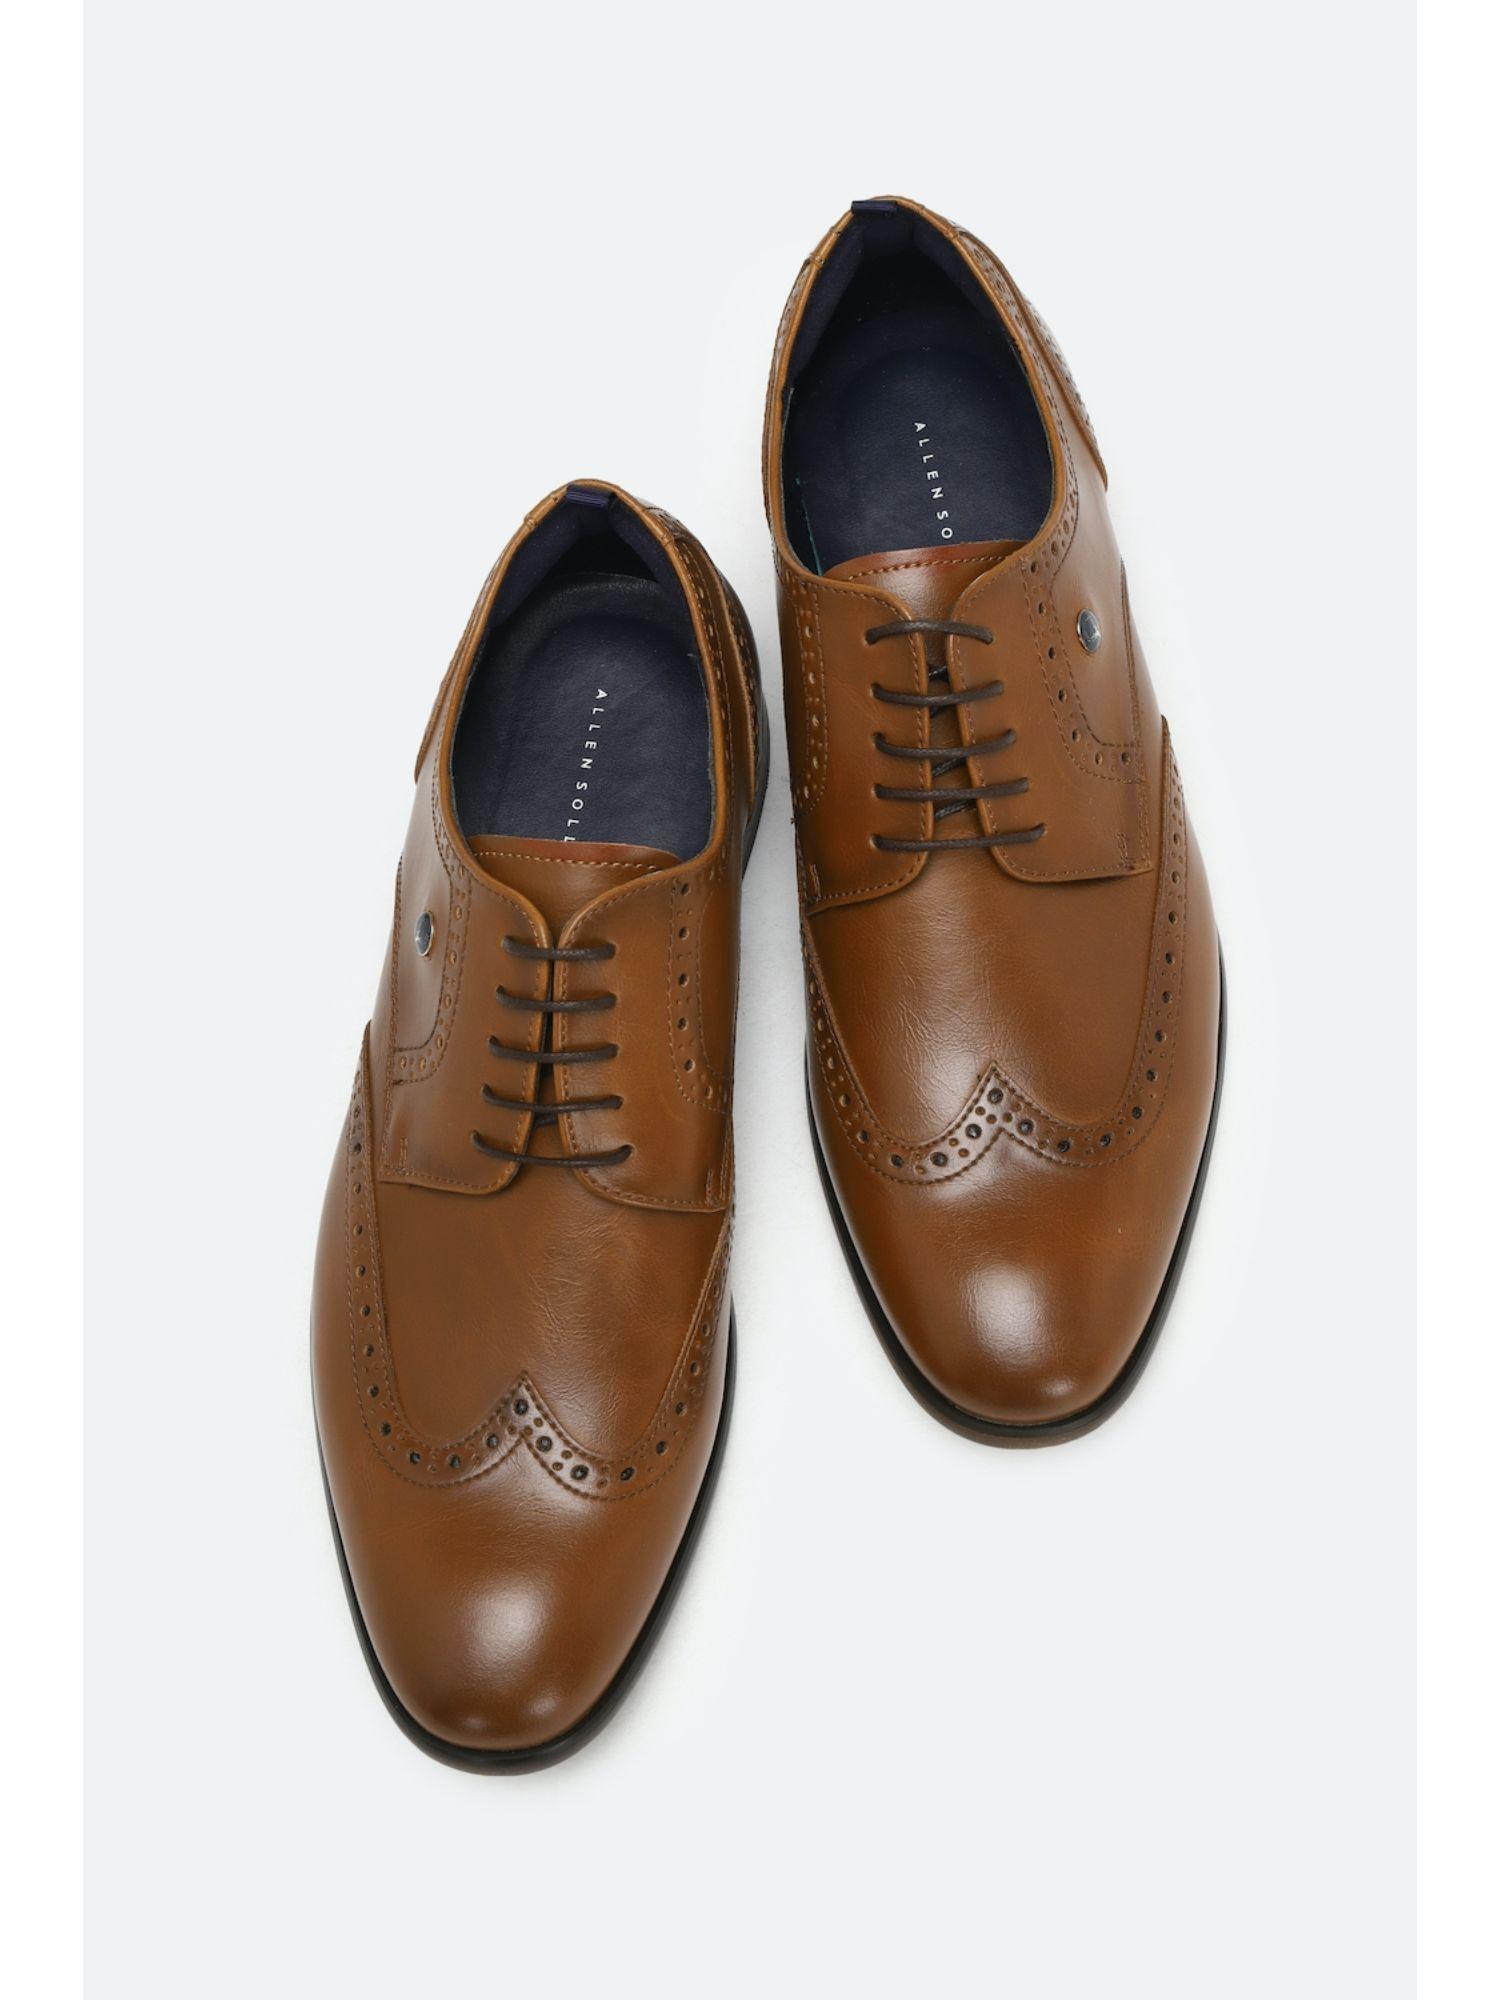 brown-derby-shoes